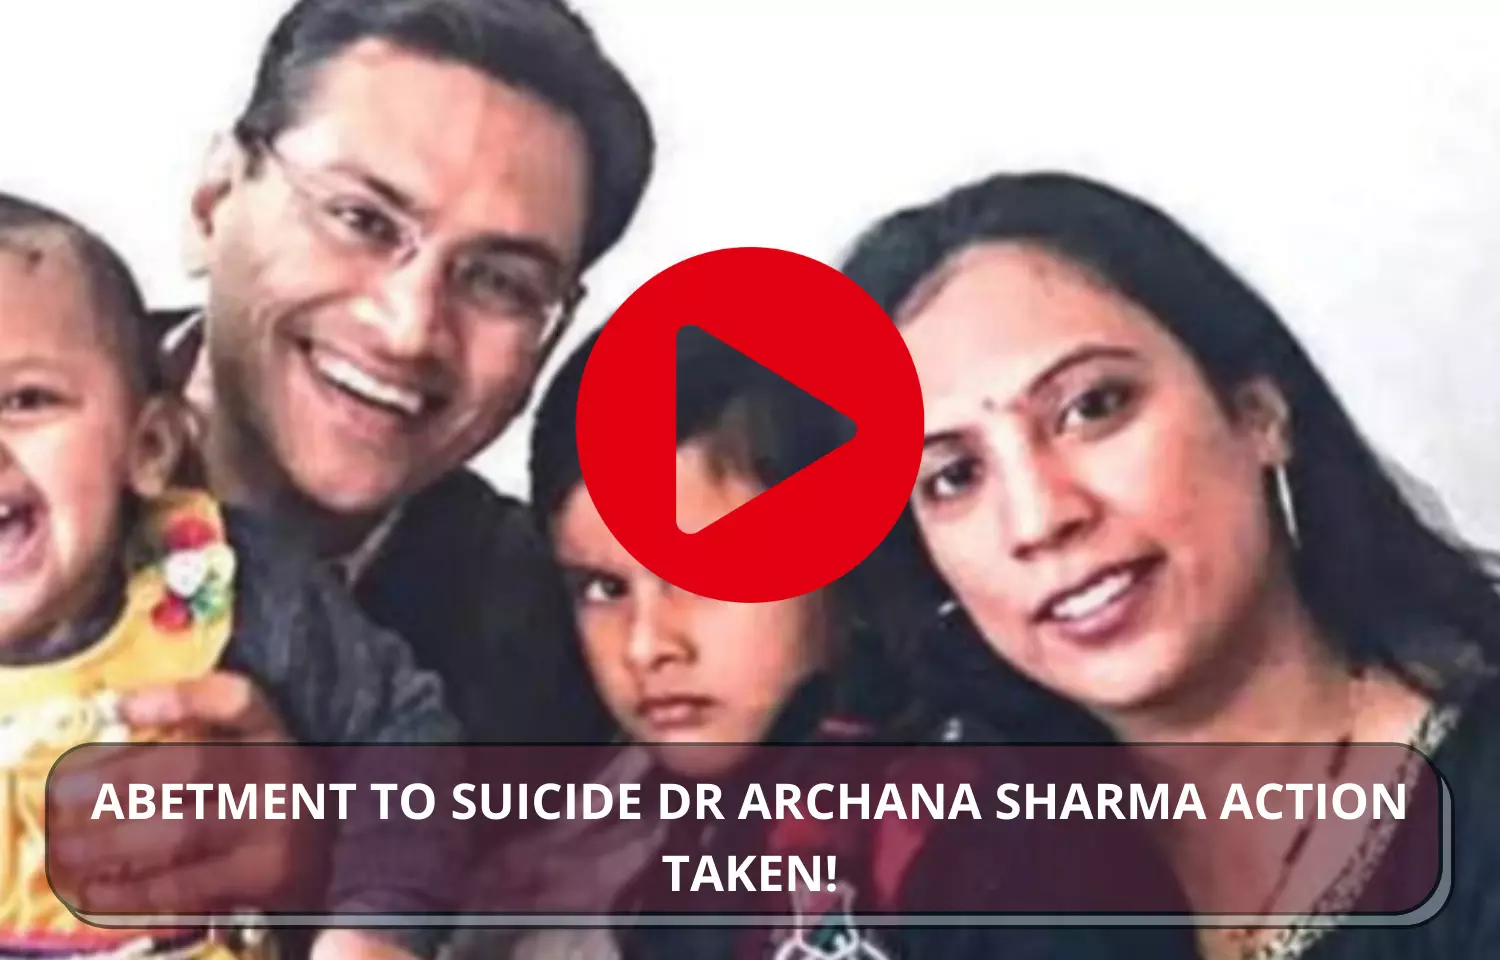 ABETMENT TO SUICIDE DR ARCHANA SHARMA ACTION TAKEN!